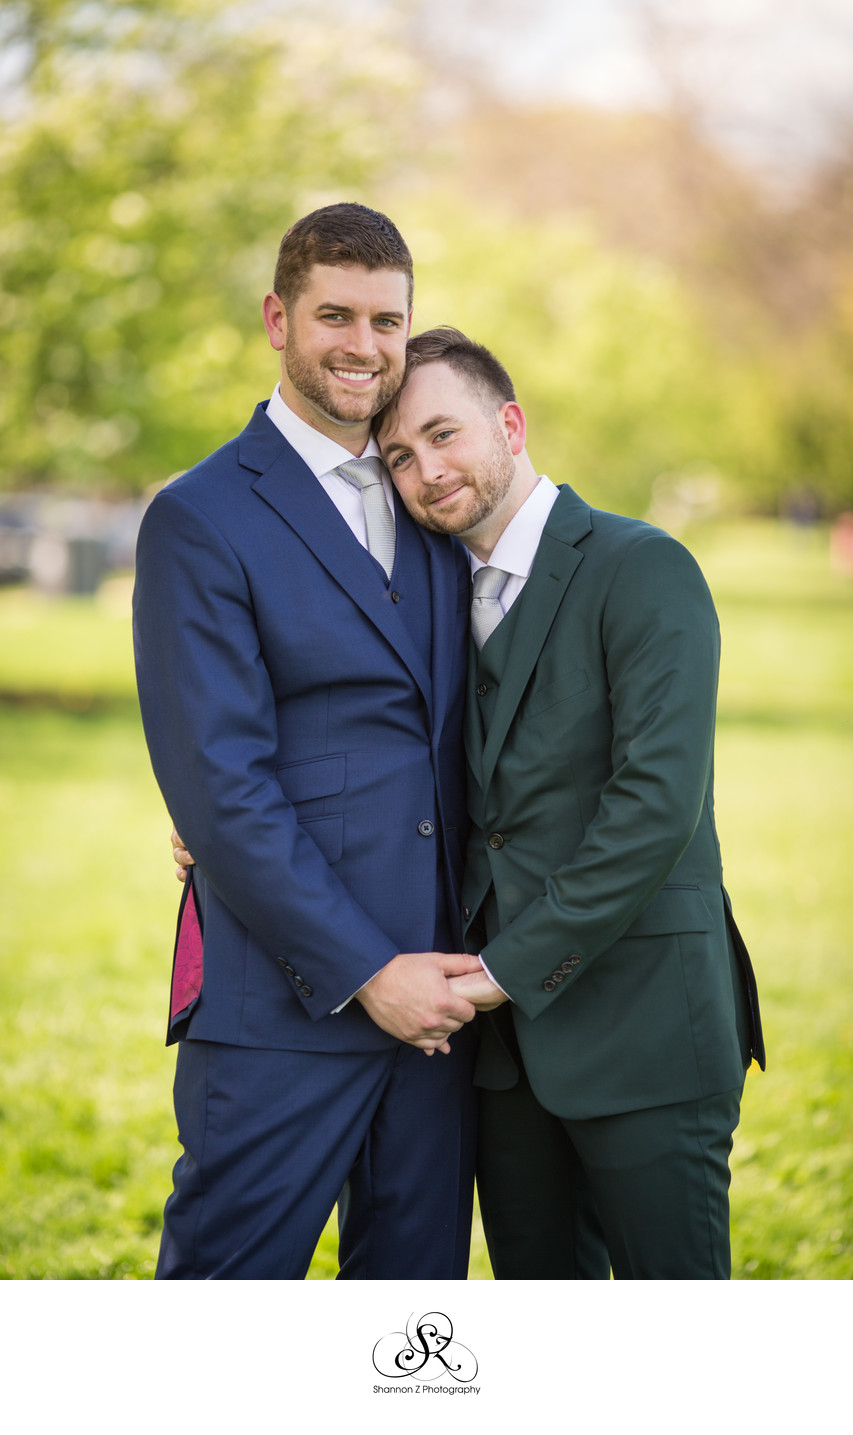 LGBTQ Friendly Wedding Photography: Two Grooms